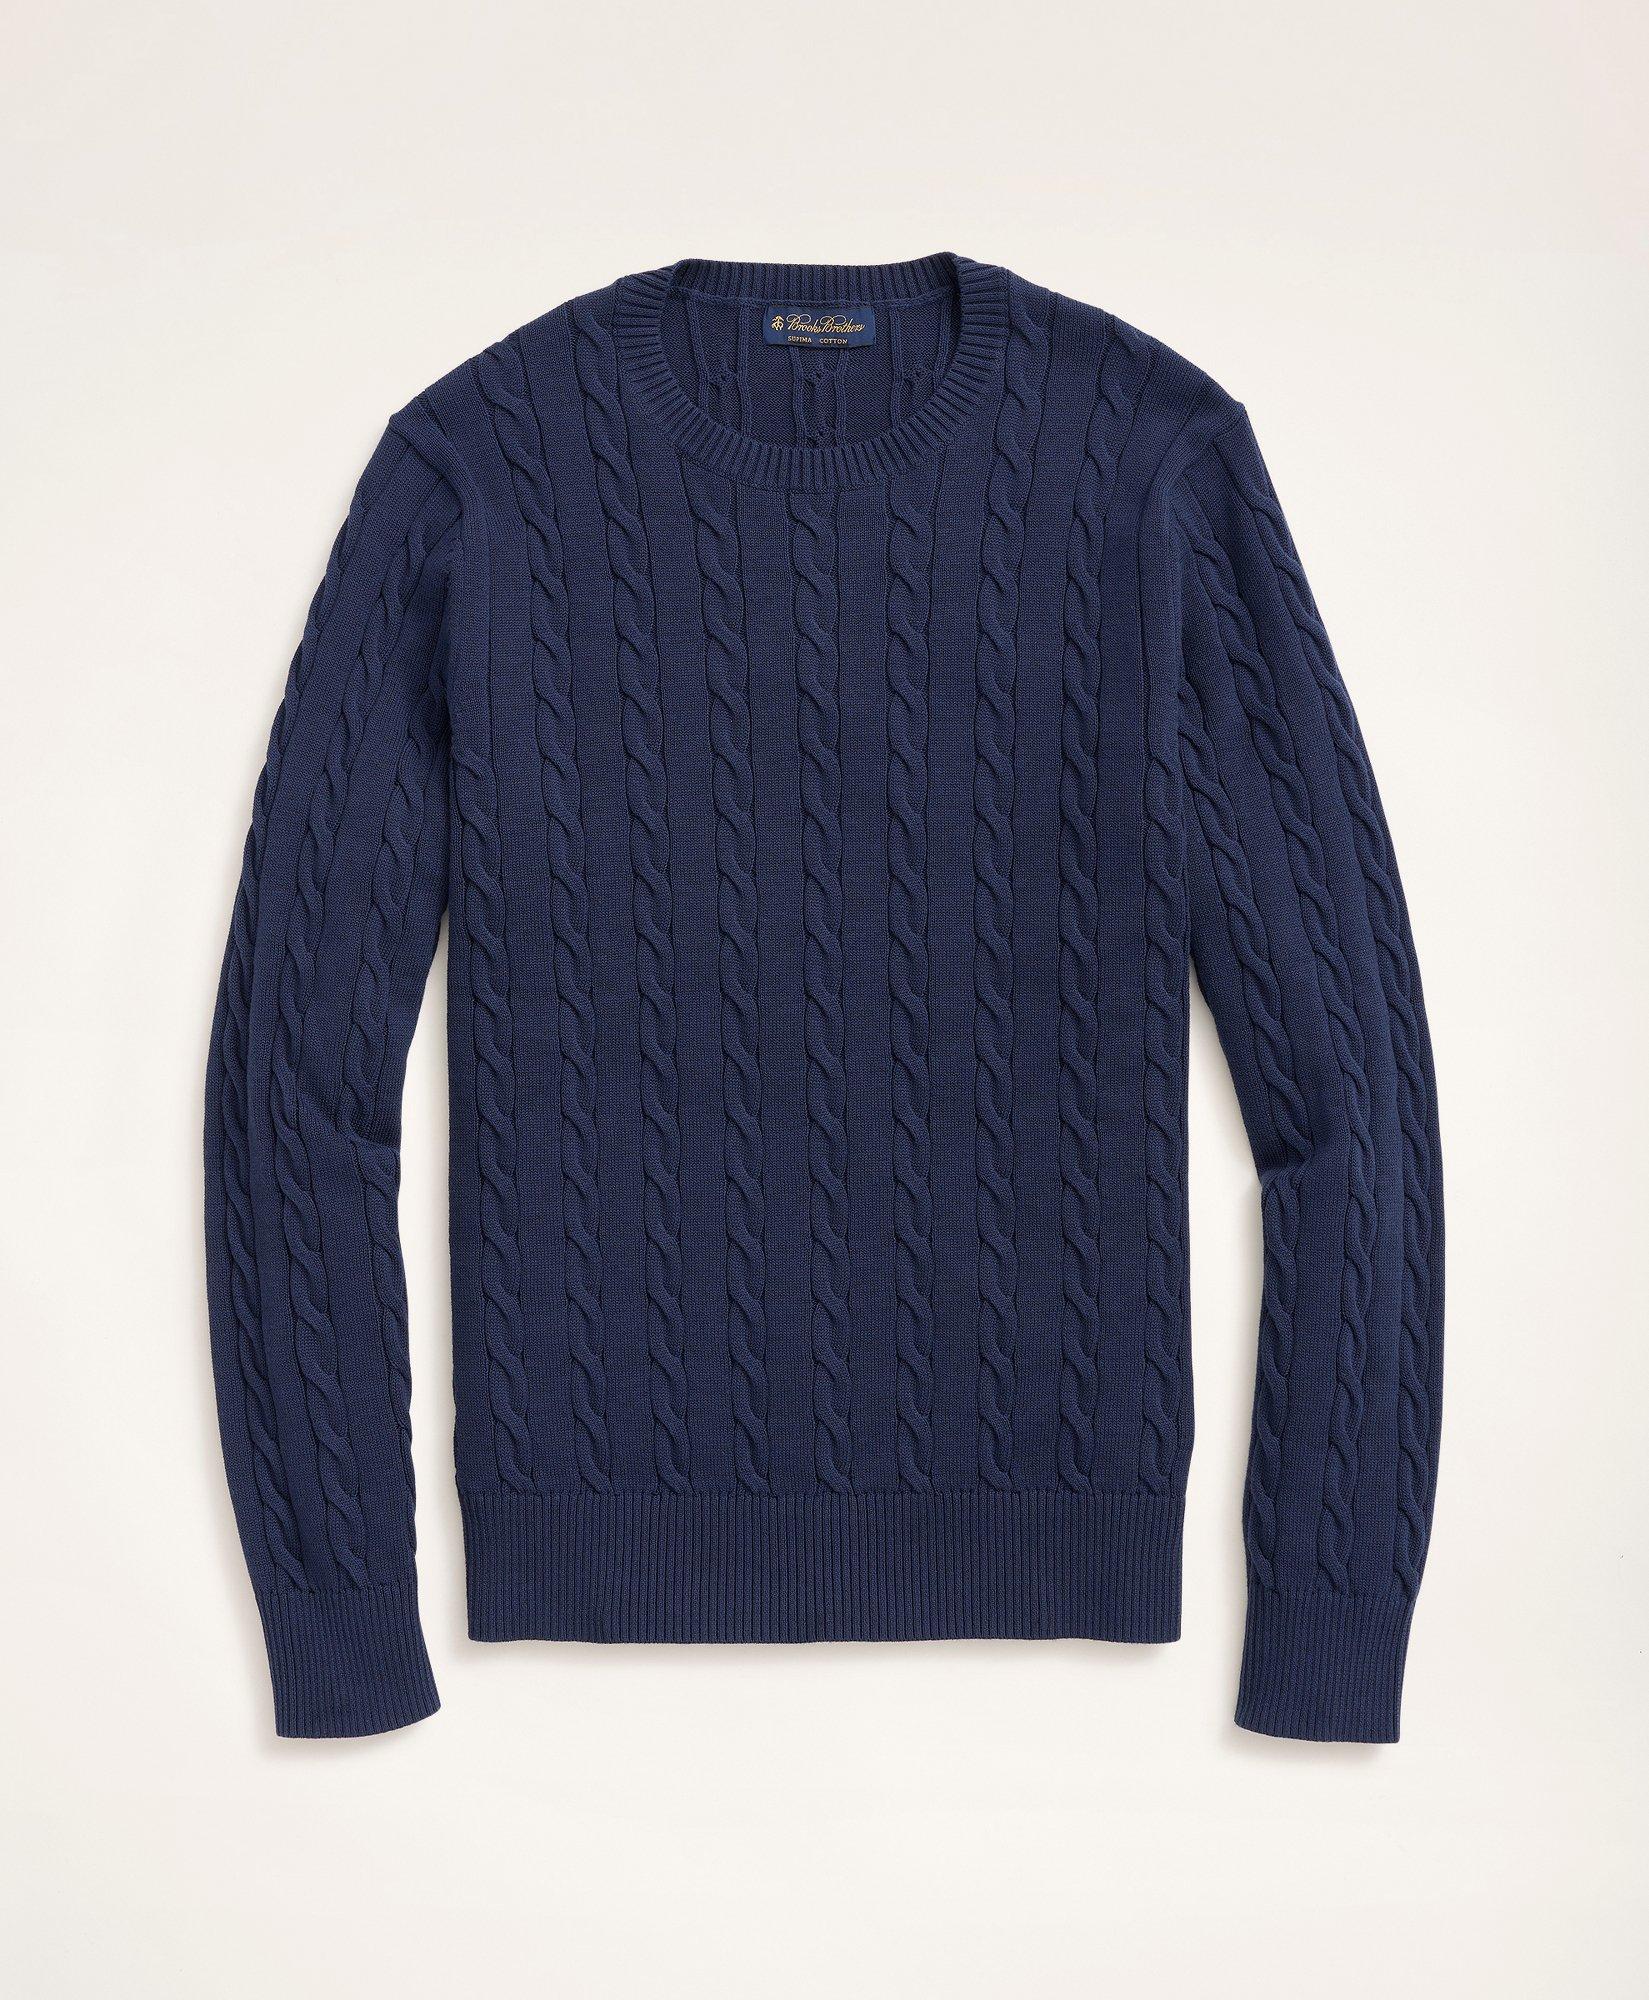 Brooks Brothers Big & Tall Supima Cotton Cable Crewneck Sweater | Navy | Size 4x Tall